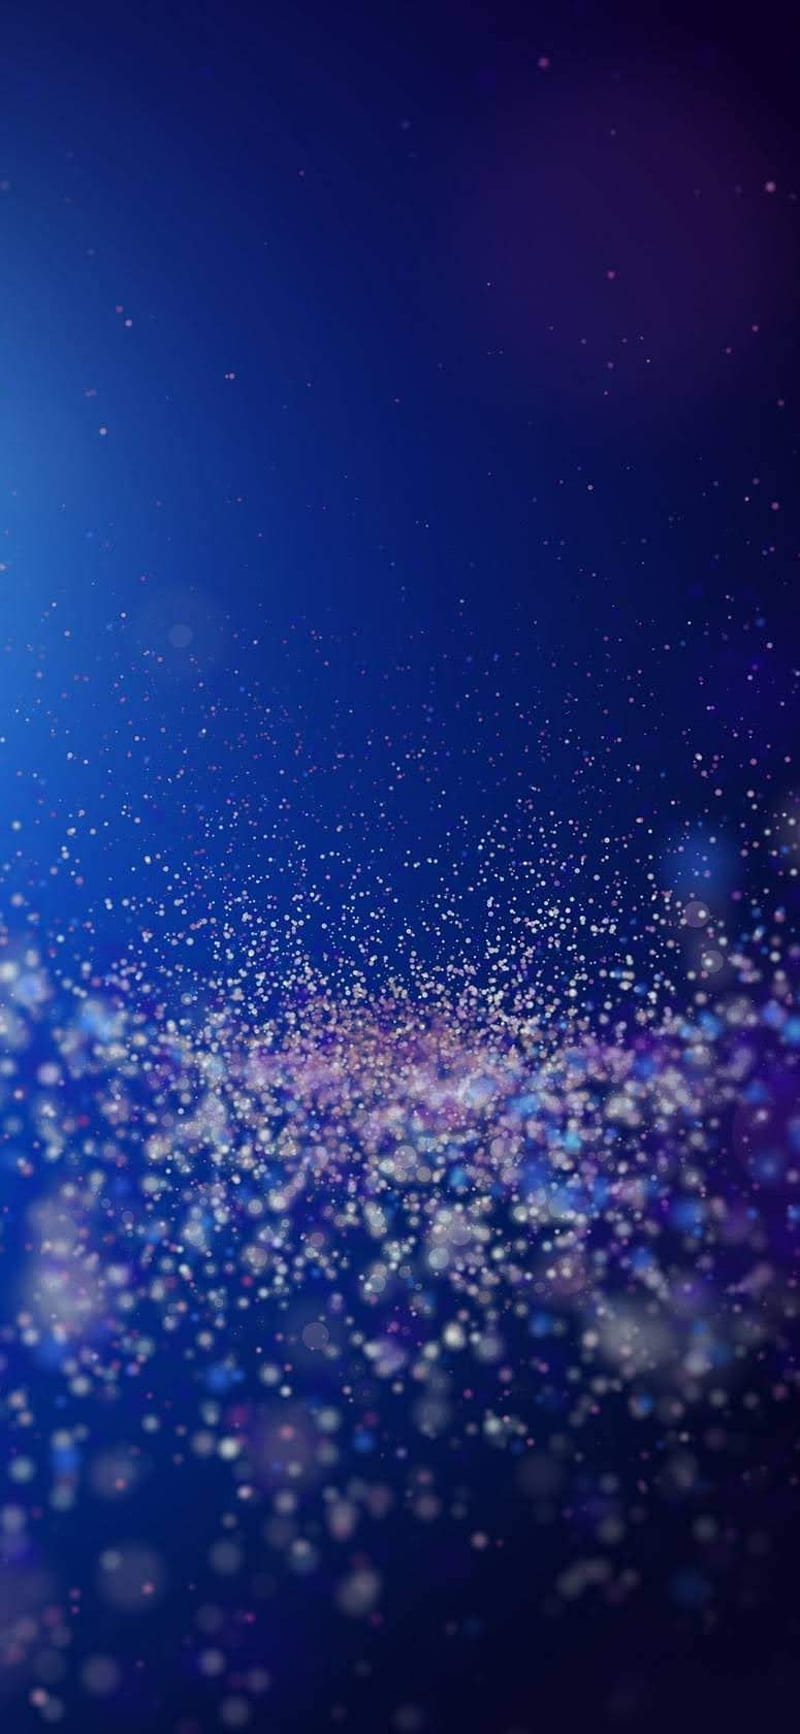 Details more than 56 glitter galaxy wallpaper - in.cdgdbentre